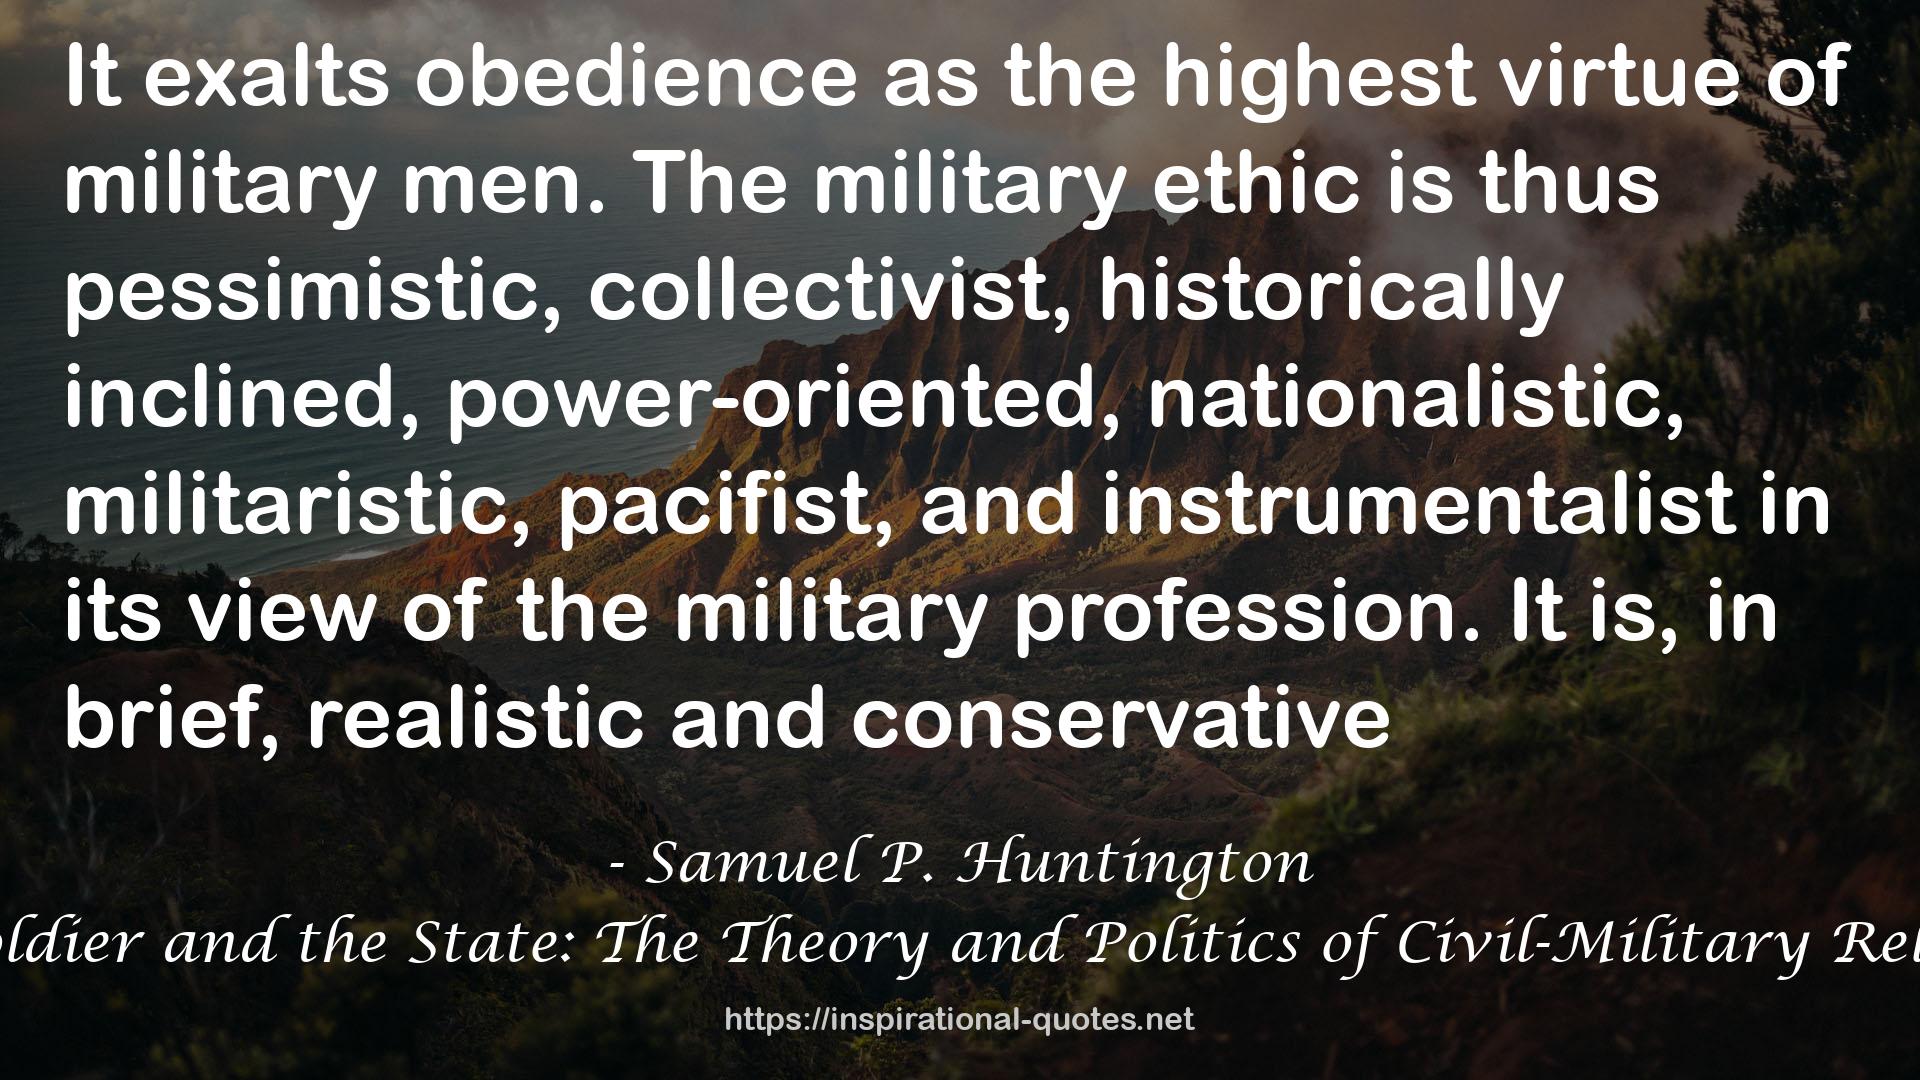 The Soldier and the State: The Theory and Politics of Civil-Military Relations QUOTES